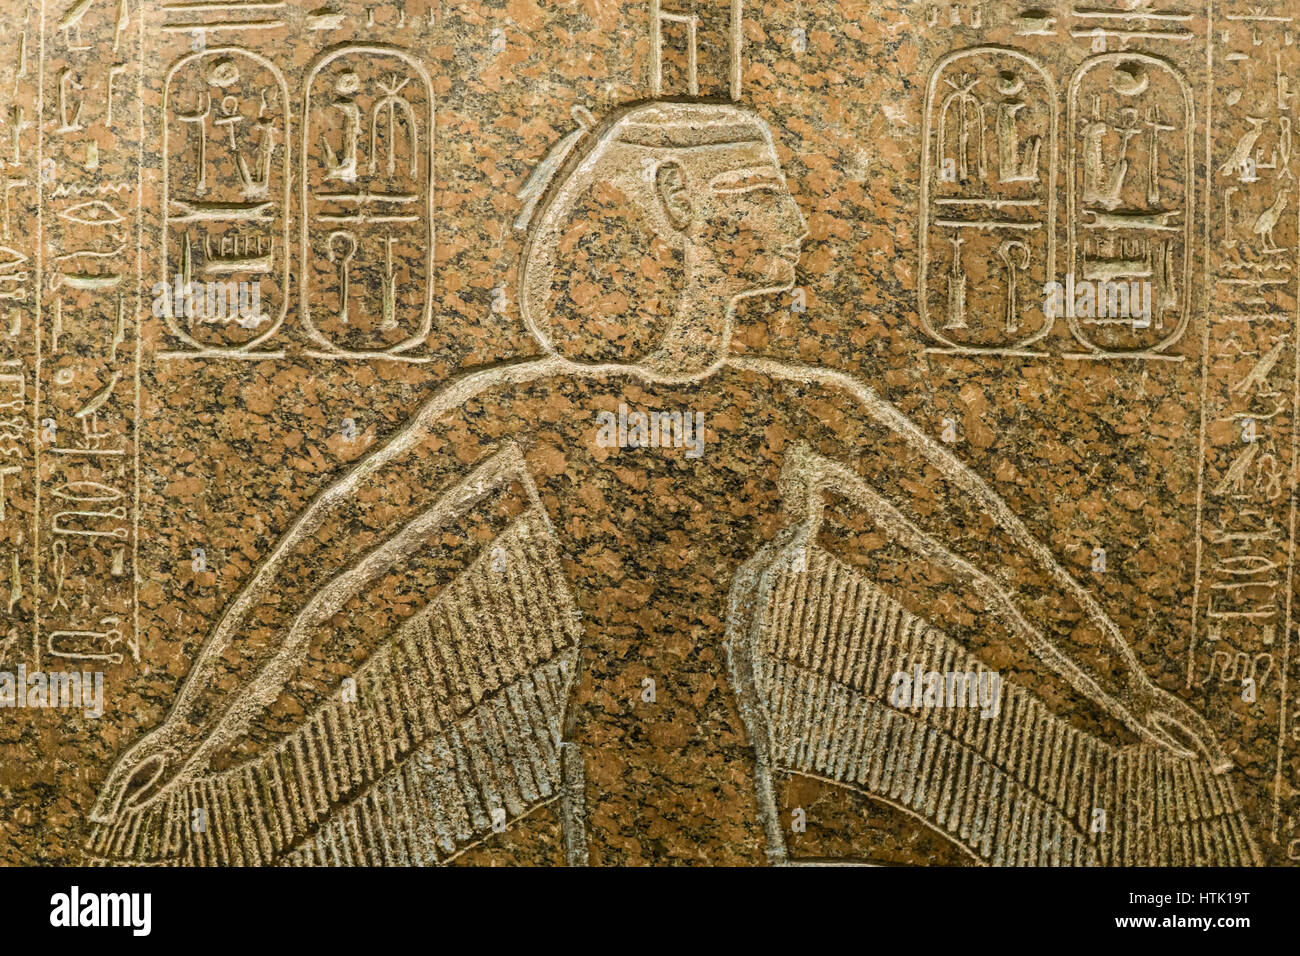 Egyptian Antiquities in the Louvre museum,Sarcophagus box of Ramesses III, Paris, France. Stock Photo